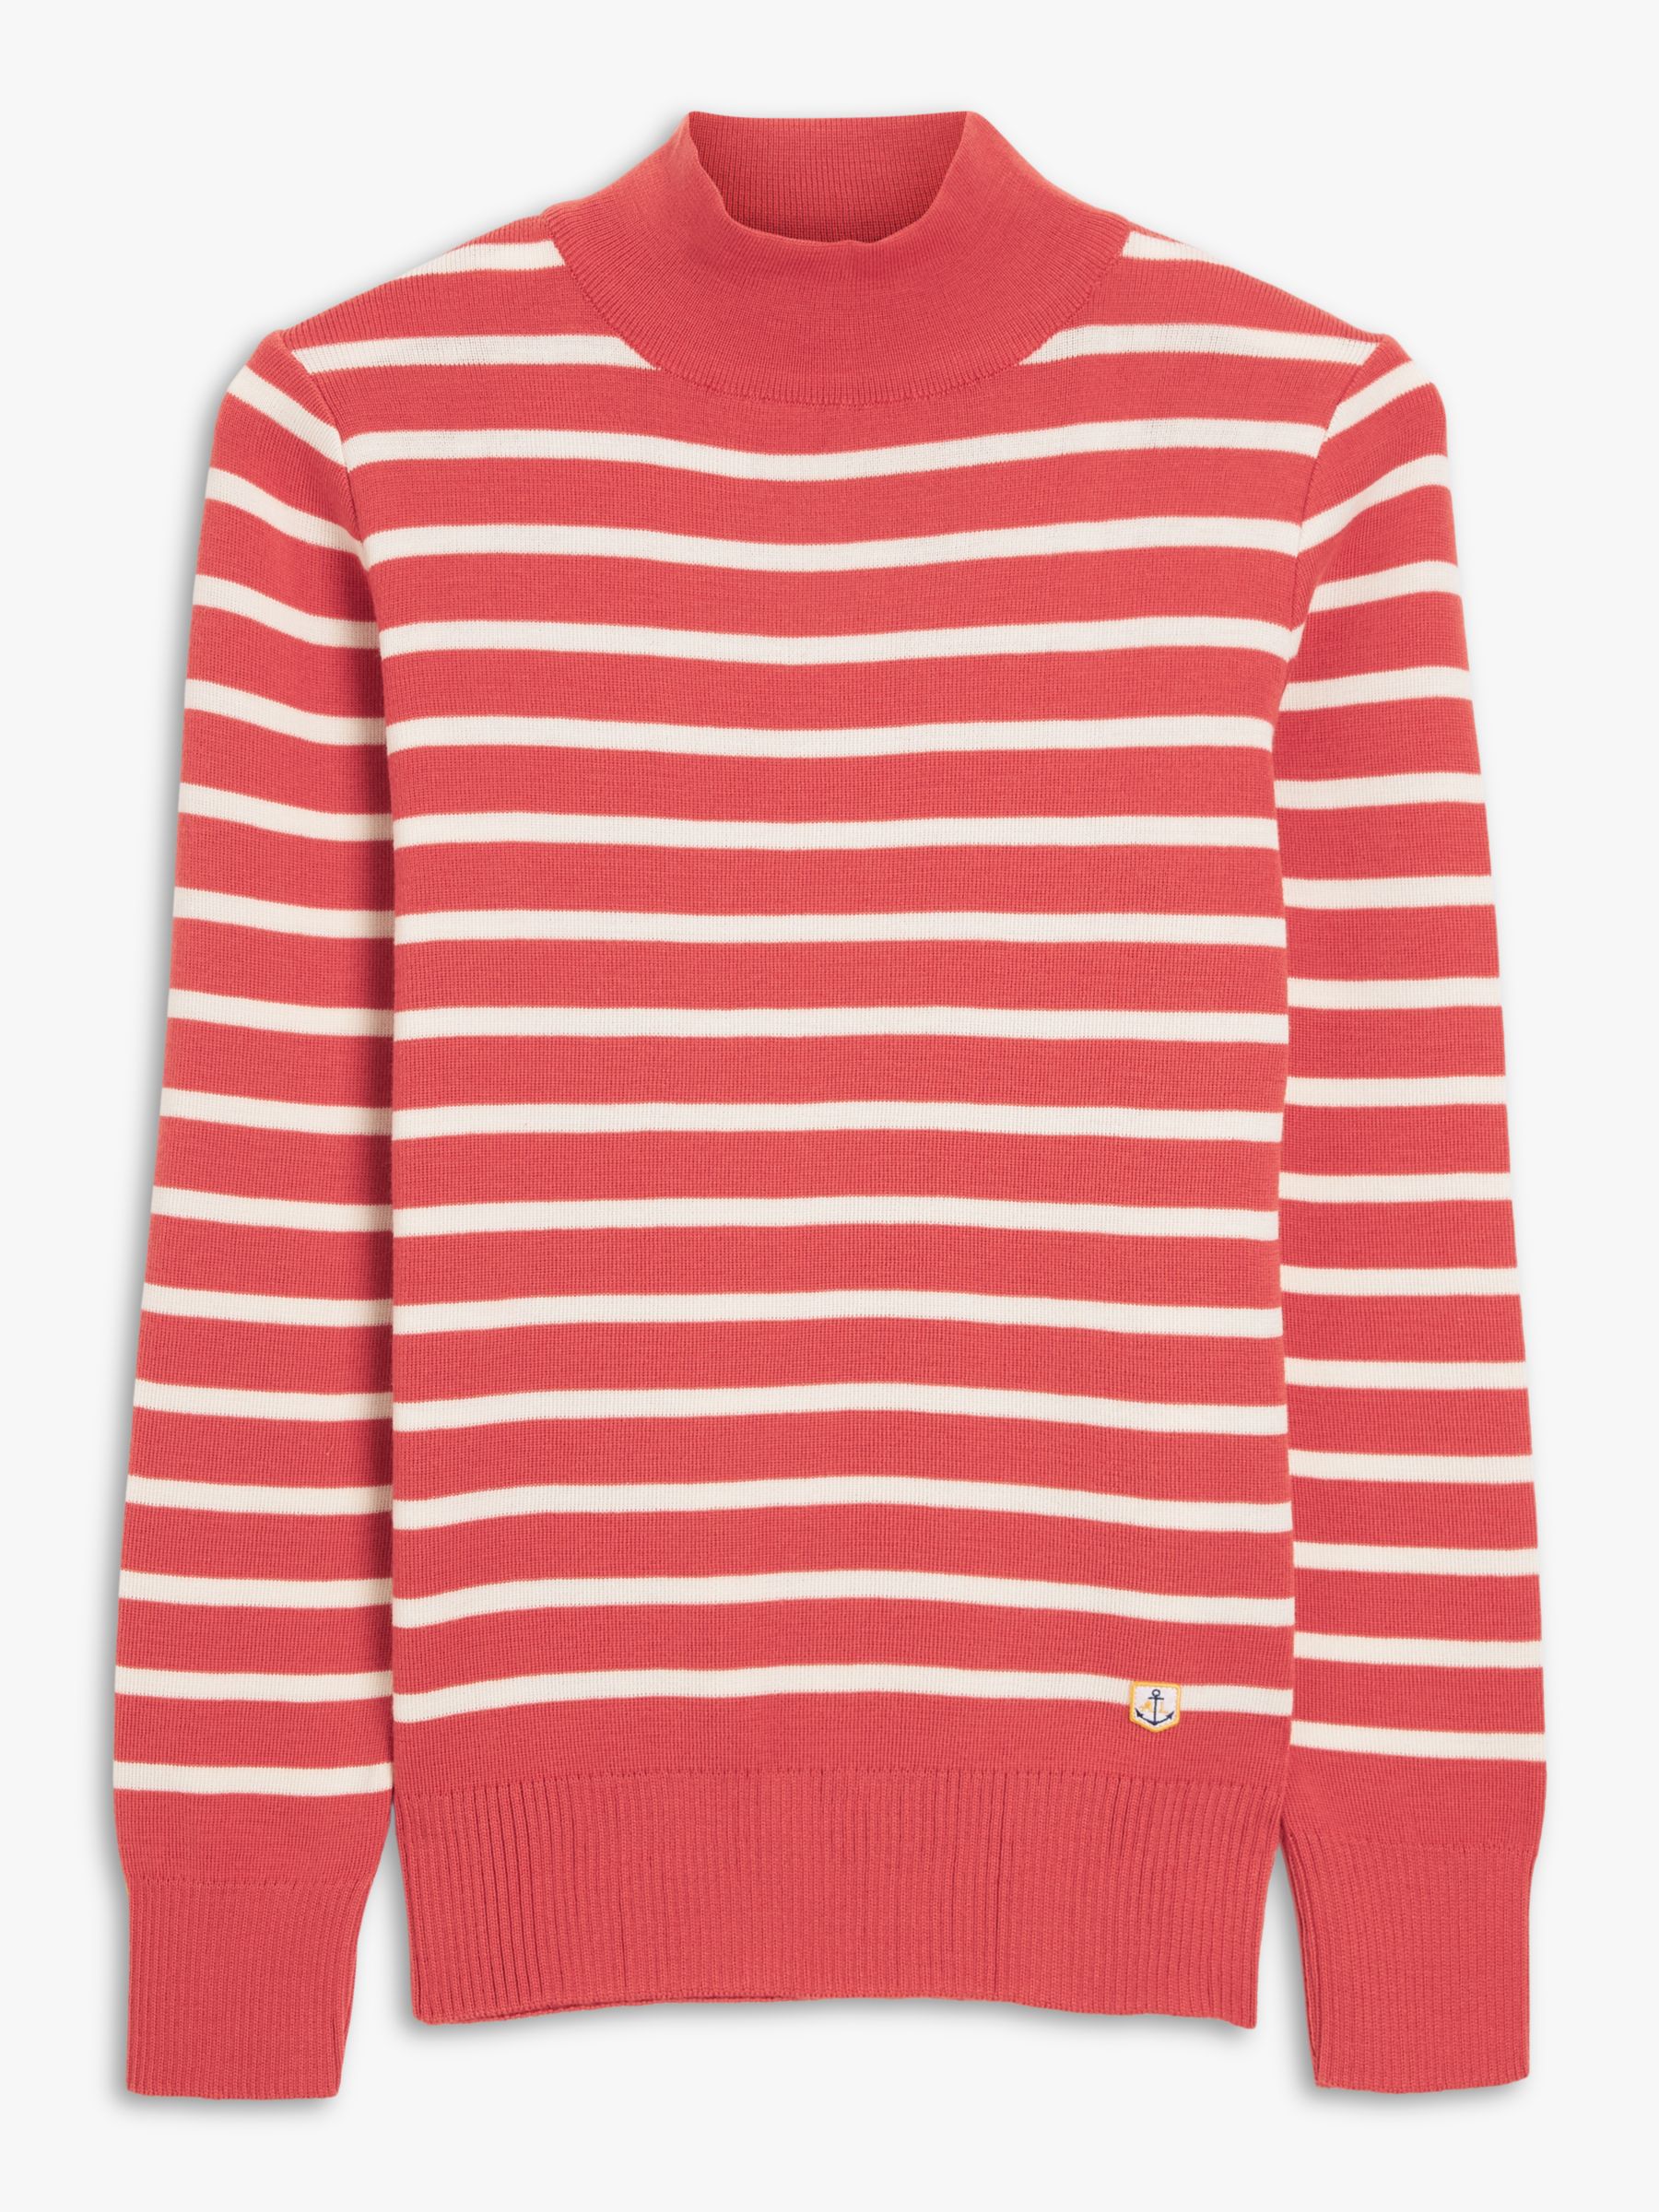 Buy Armor Lux Wool Stripe Jumper, Red/White Online at johnlewis.com